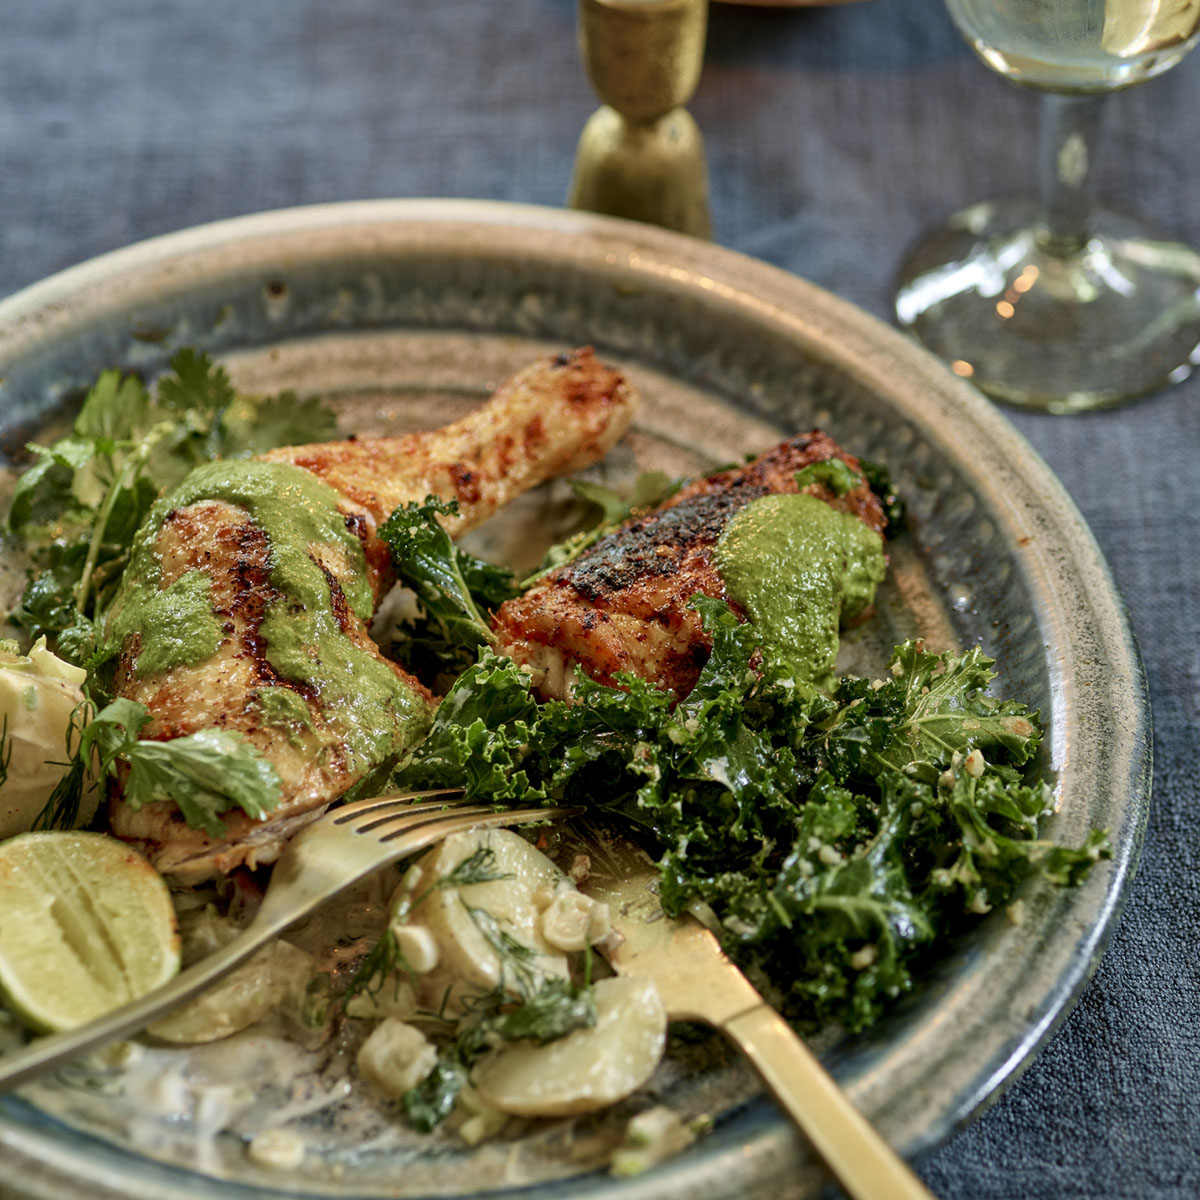 Peruvian Chicken with Kale and Potato Salad